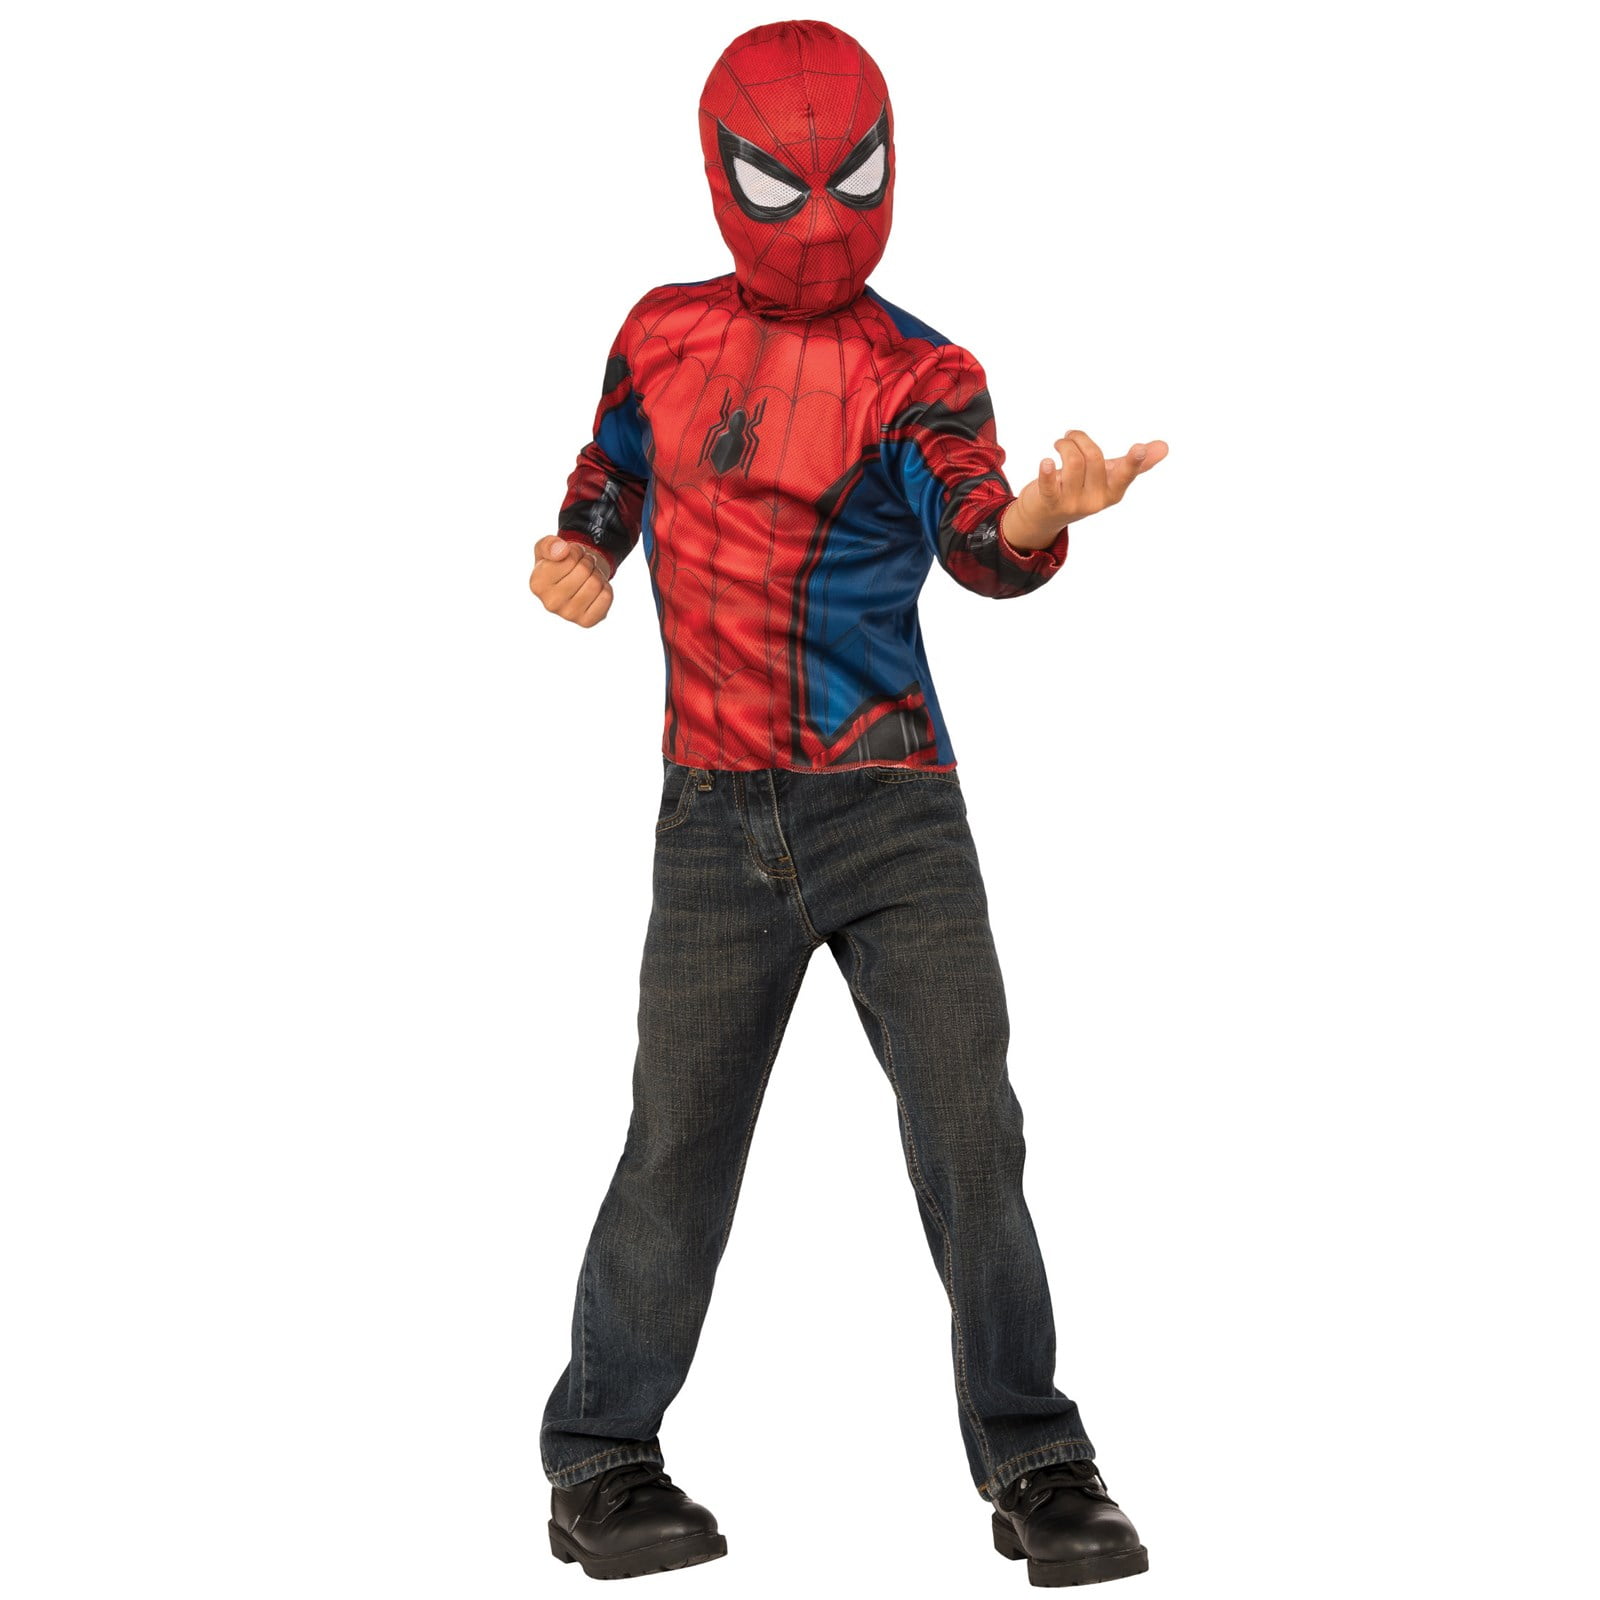 Spiderman Costume Kid's Size : 2-10yrs old, Hobbies & Toys, Toys & Games on  Carousell